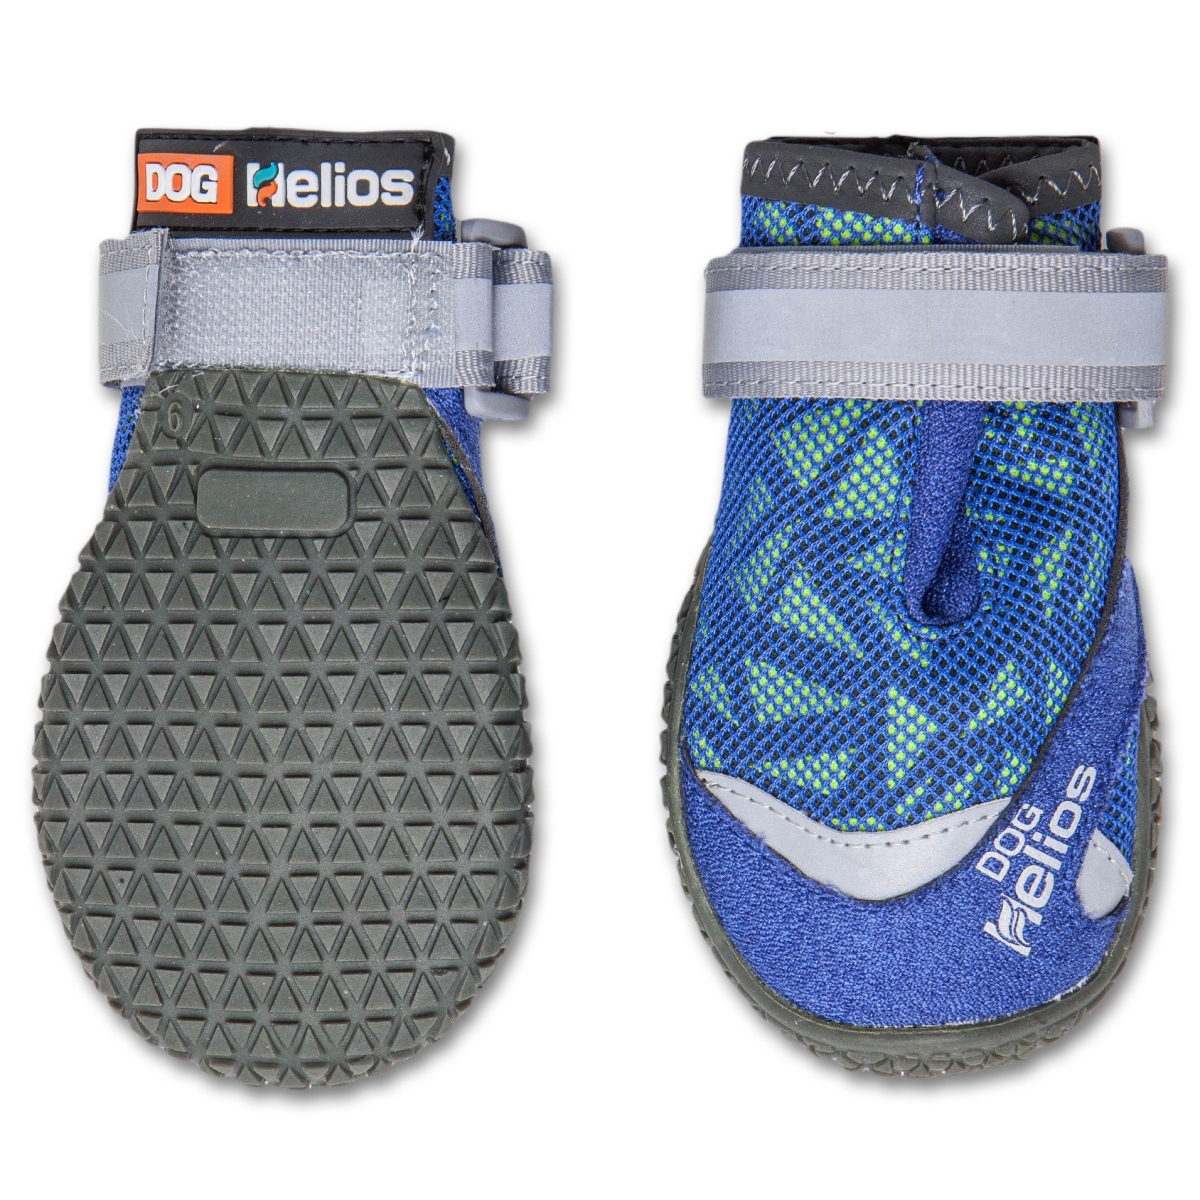 Picture of Dog Helios F17BLXL Surface Premium Grip Performance Dog Shoes - Blue - Extra-Large